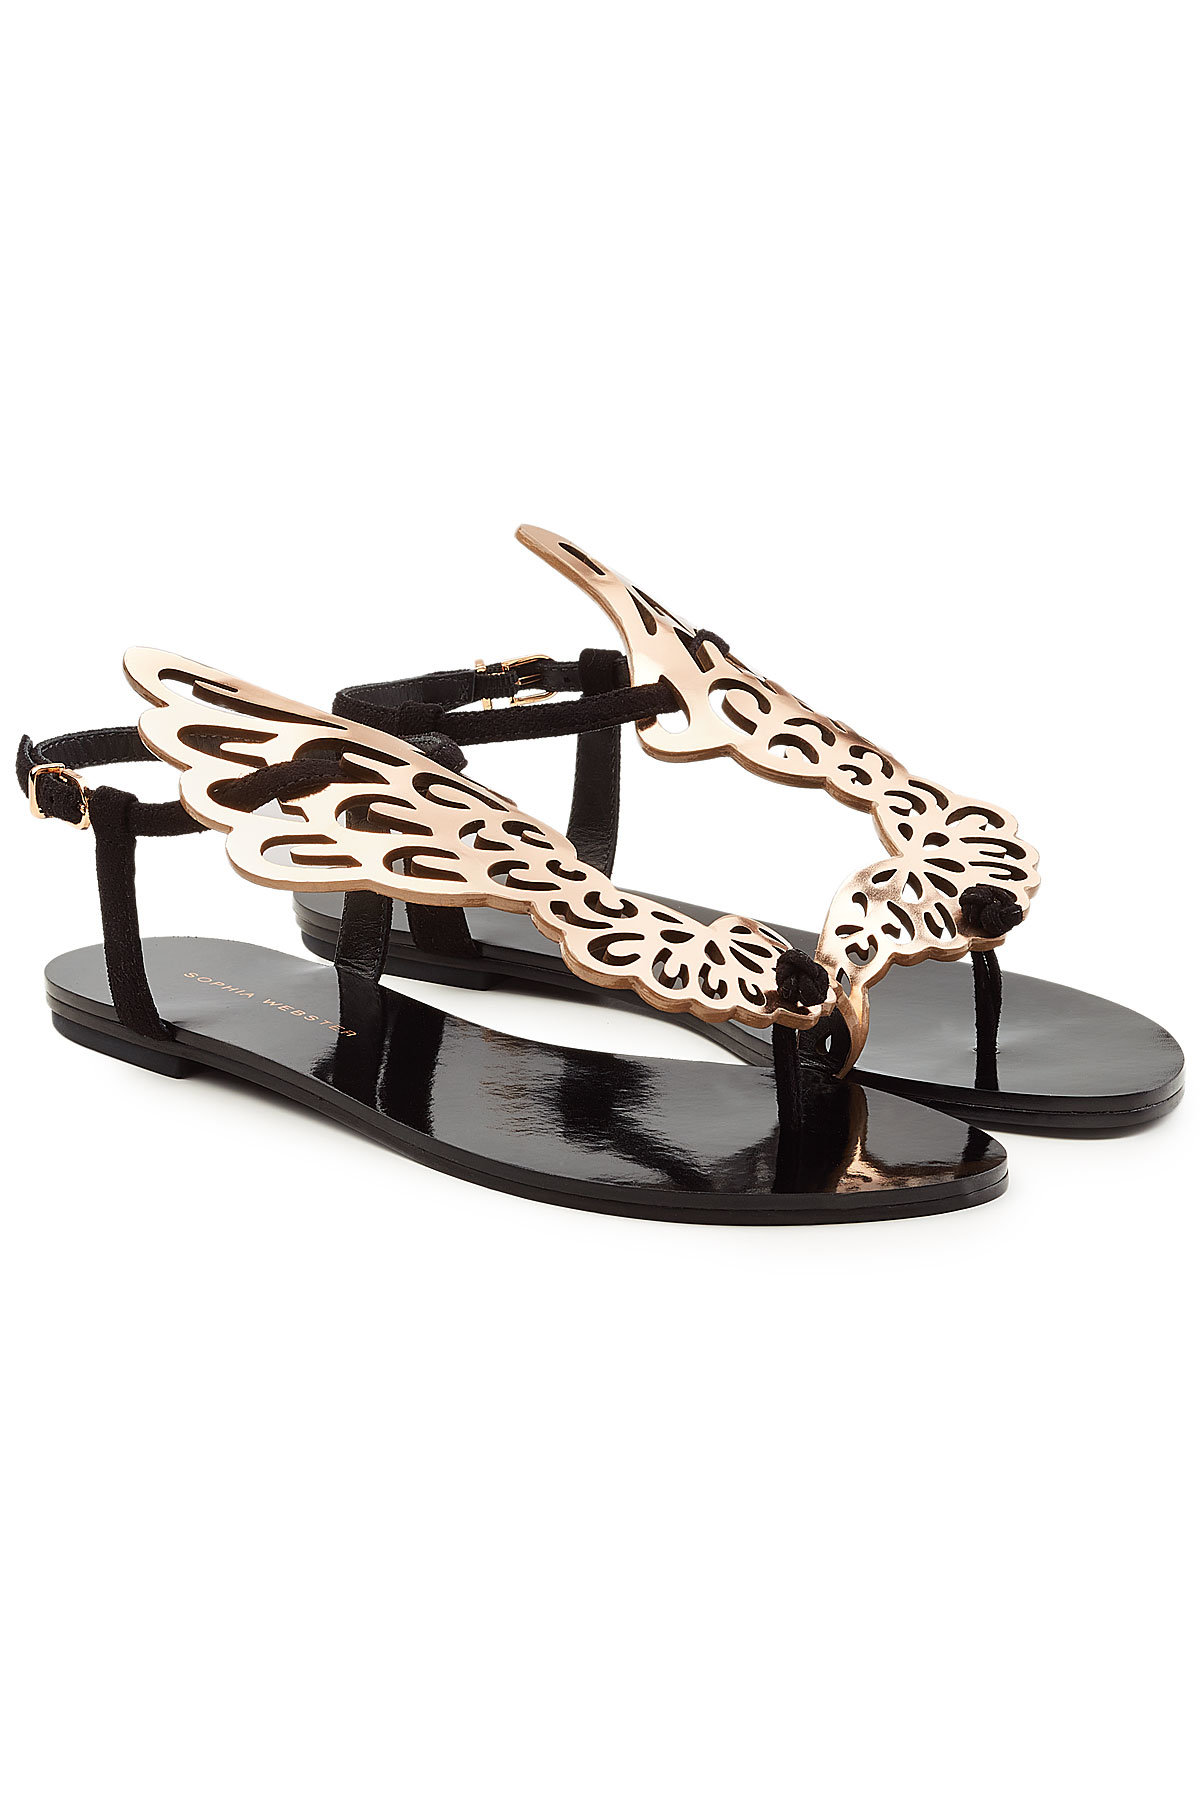 Bibi Butterfly Leather and Suede Sandals by Sophia Webster